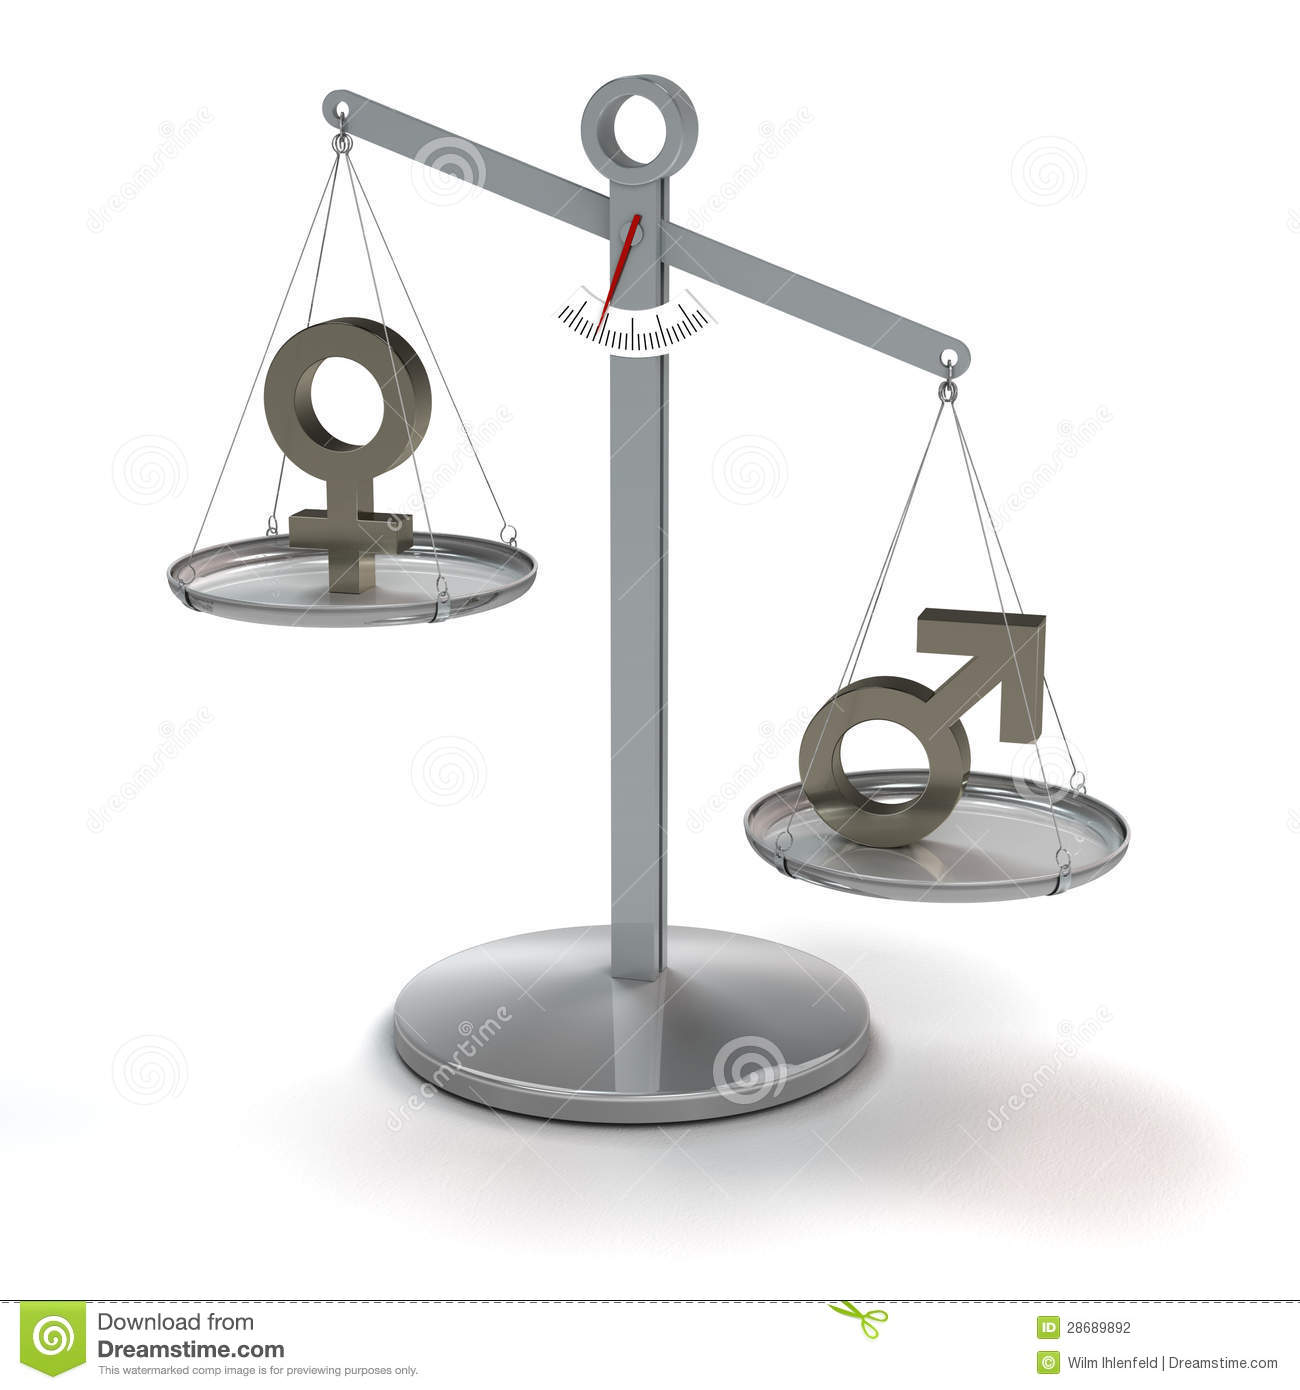 Conceptual Image Concerning Equality Of Men And Women 